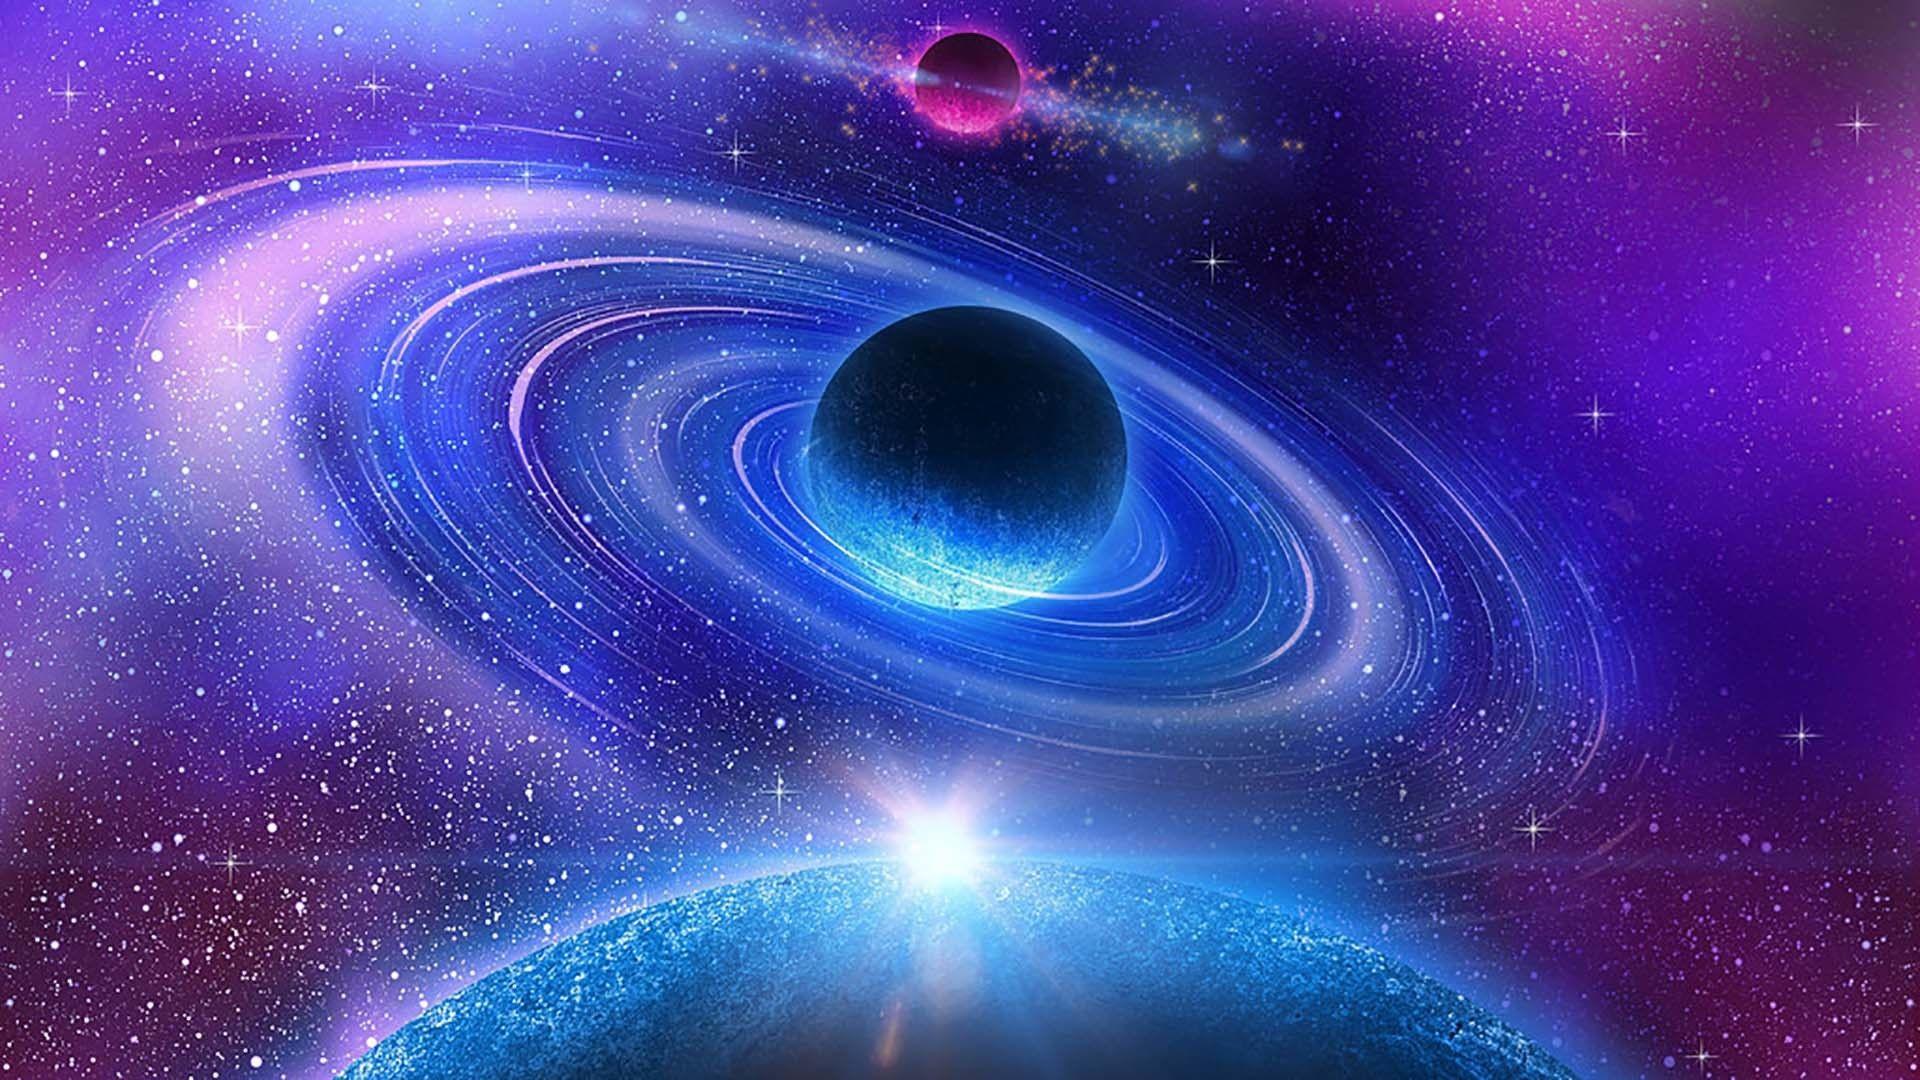 Cool Galaxy Pc Backgrounds